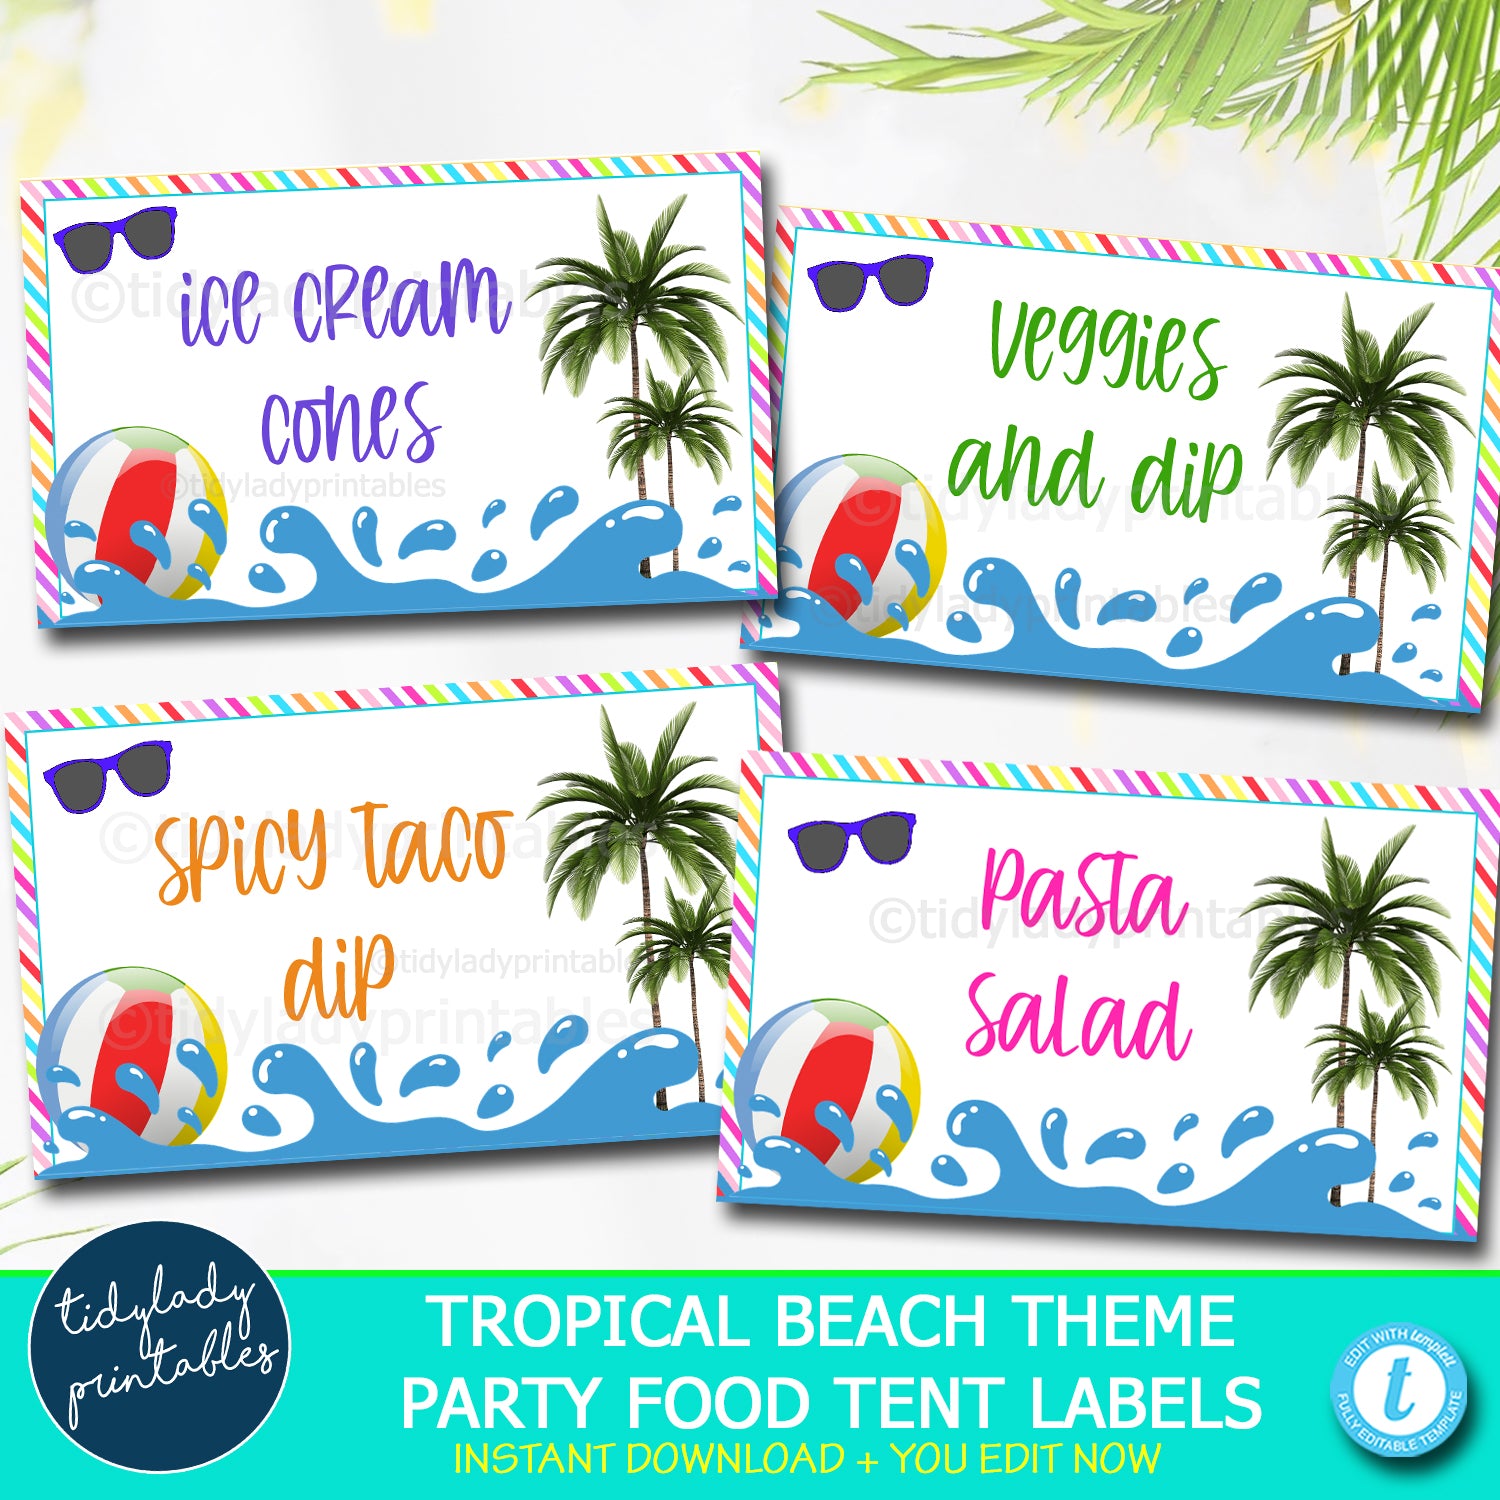 Tropical Beach Party Food Tent Label